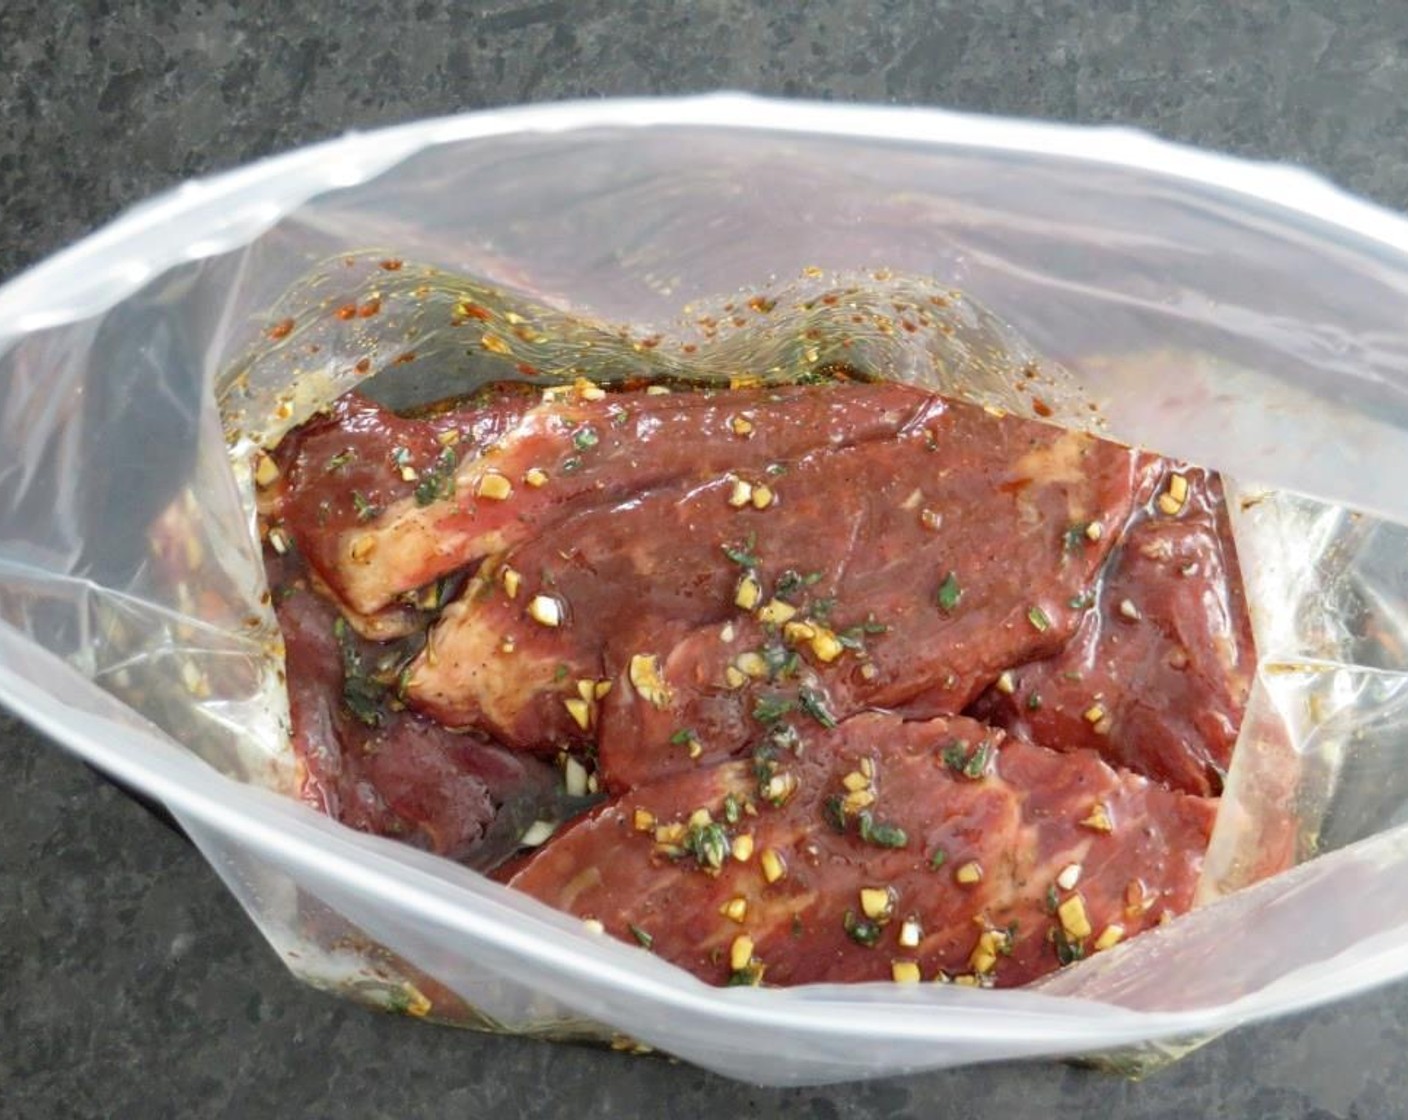 step 4 Place Flank Steak (1.5 lb) in the bag, remove as much air as possible, and seal. Flip the steak around a few times to coat with marinade. Place in the refrigerator for at least two hours and up to eight. Flip and rotate every few hours.